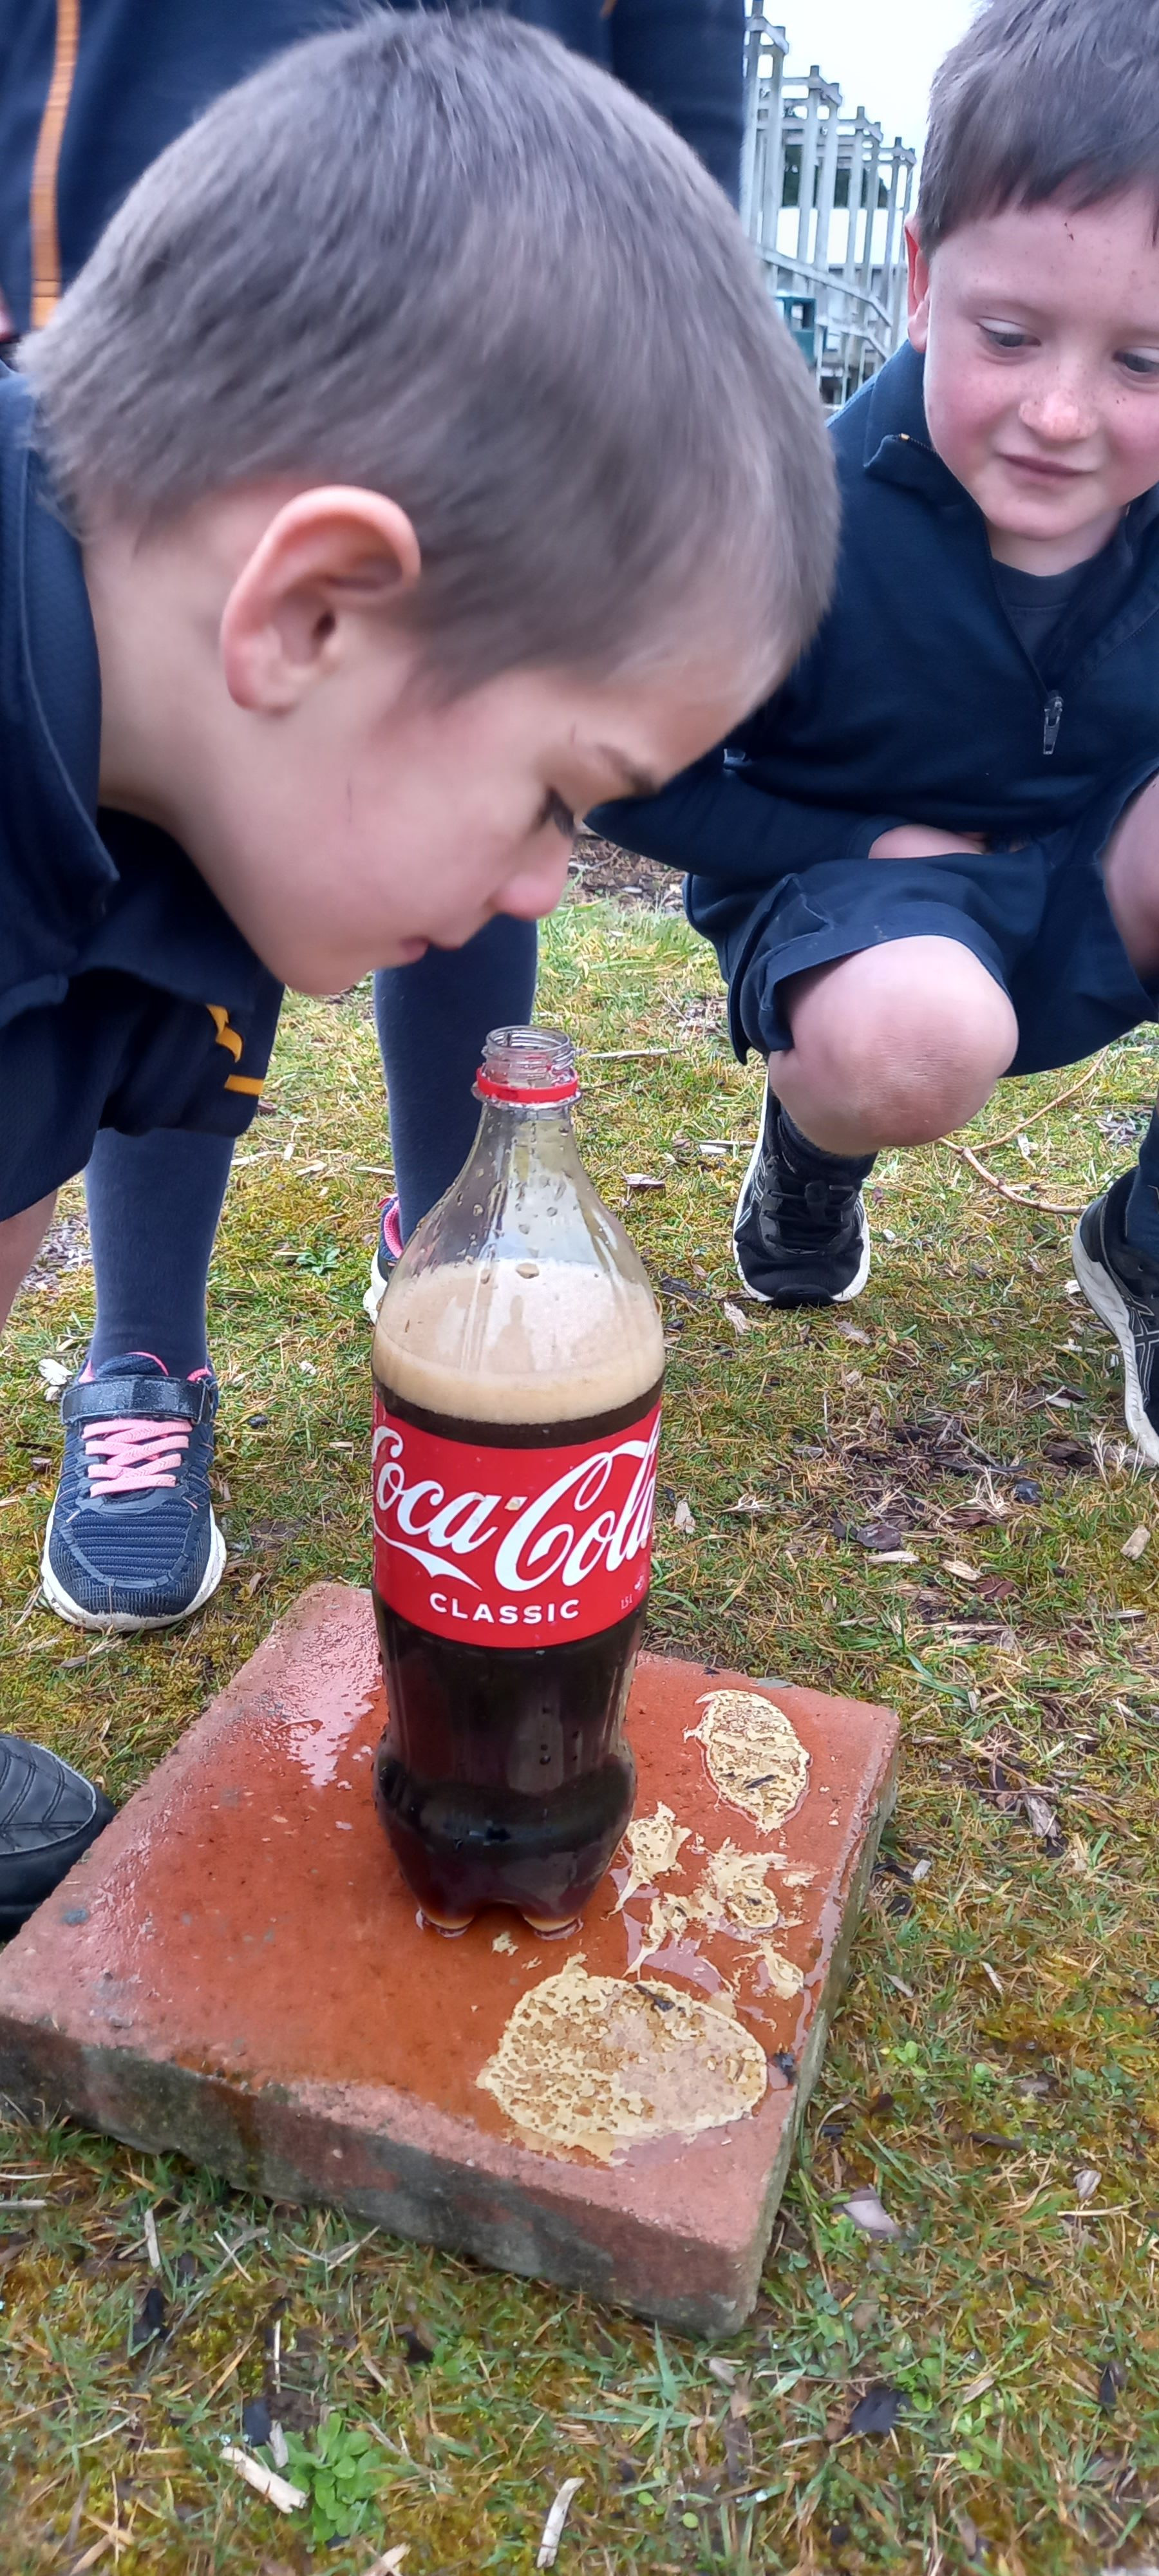 What happens when you combine Mentos, Diet Coke and Room 1?